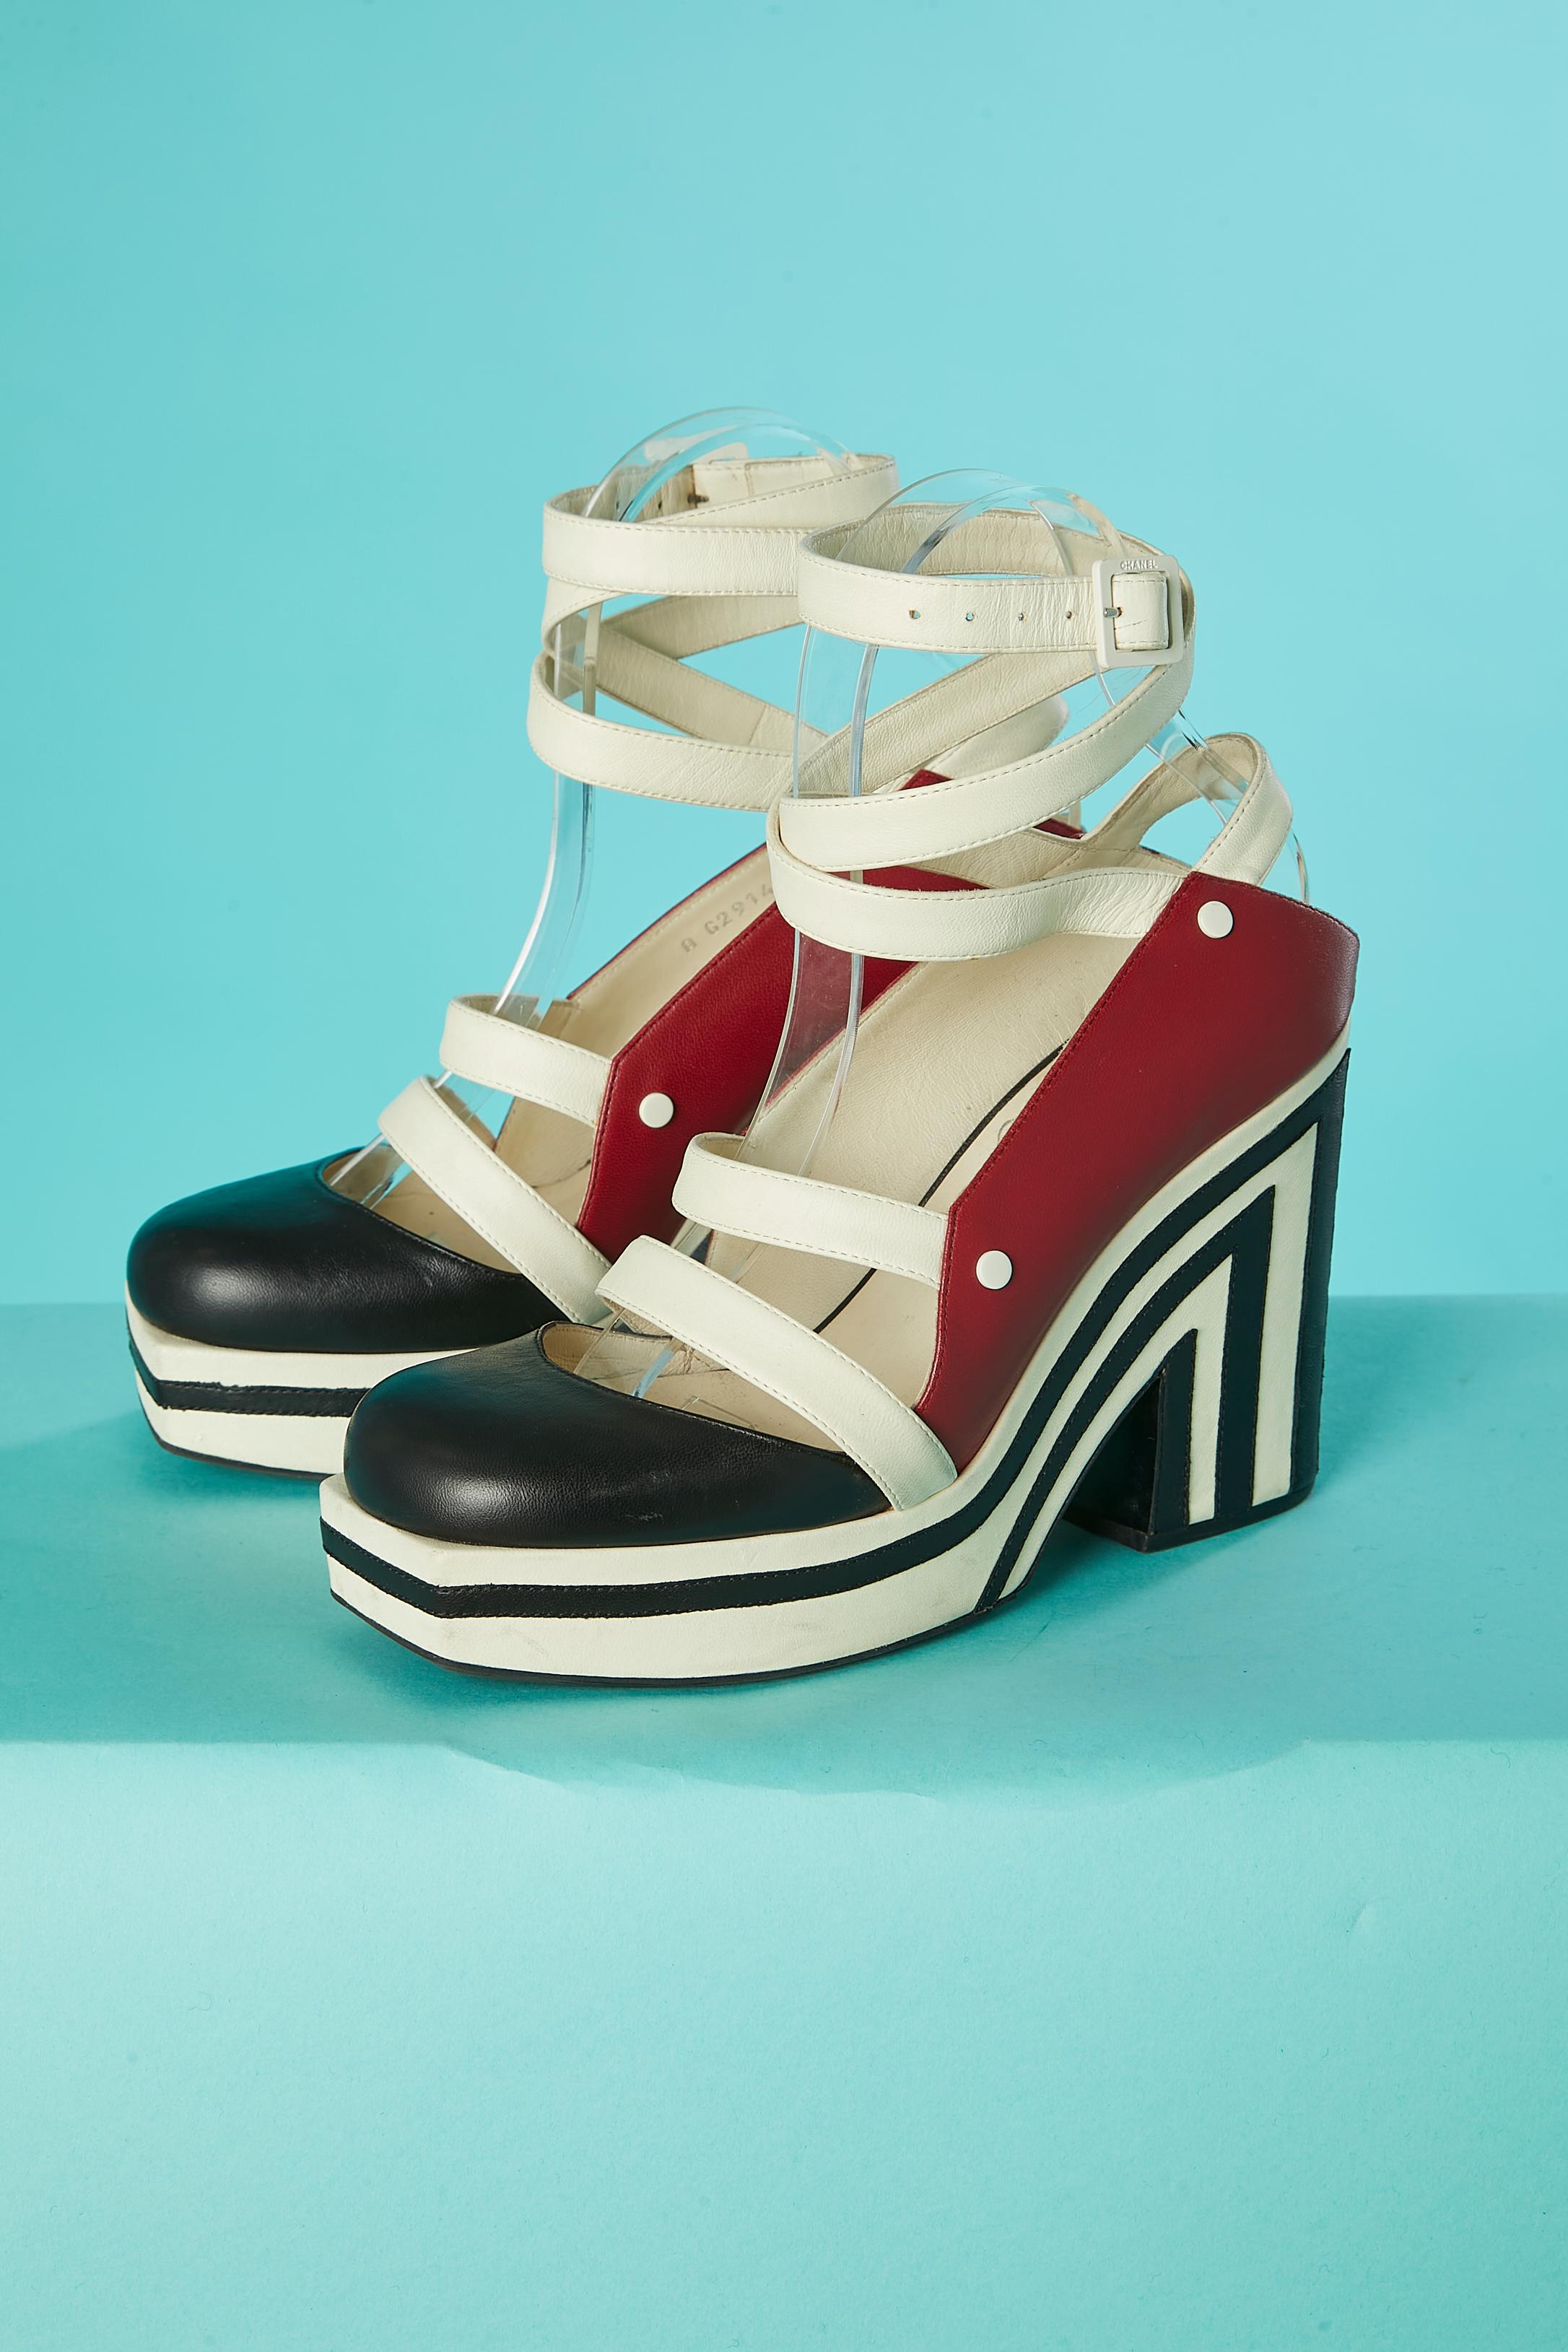 Graphic plateform sandals with ankle straps Chanel SS 2013 In Excellent Condition For Sale In Saint-Ouen-Sur-Seine, FR